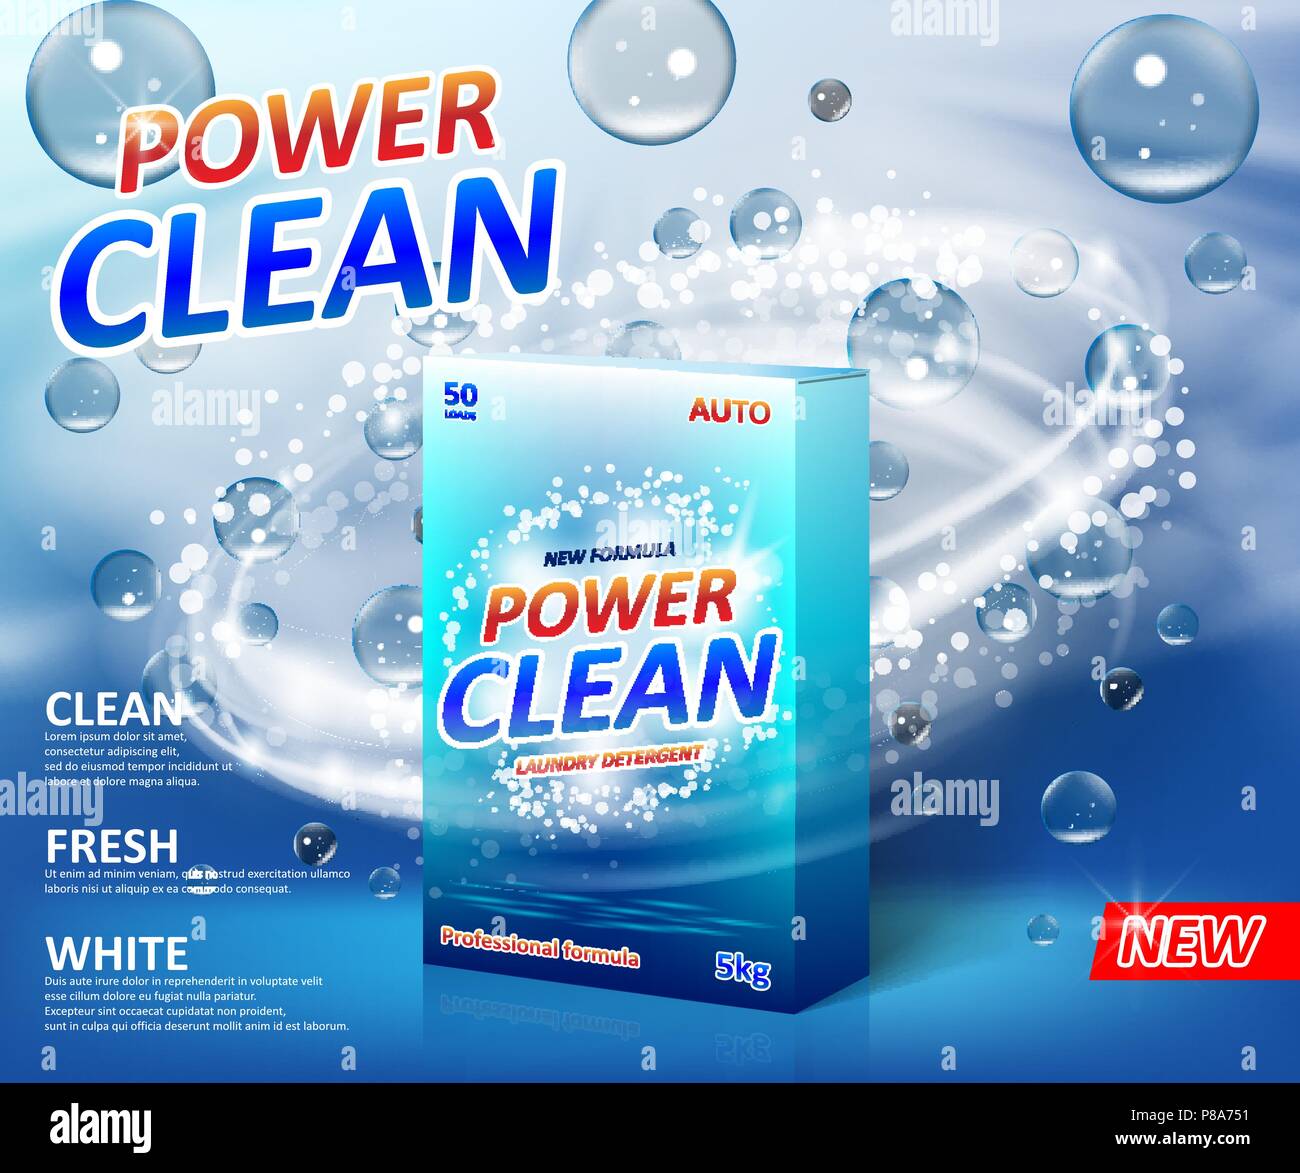 https://c8.alamy.com/comp/P8A751/powder-laundry-detergent-advertising-poster-washing-powder-carton-box-package-label-template-with-soap-bubbles-stain-remover-cleaner-design-for-bathroom-vector-illustration-P8A751.jpg